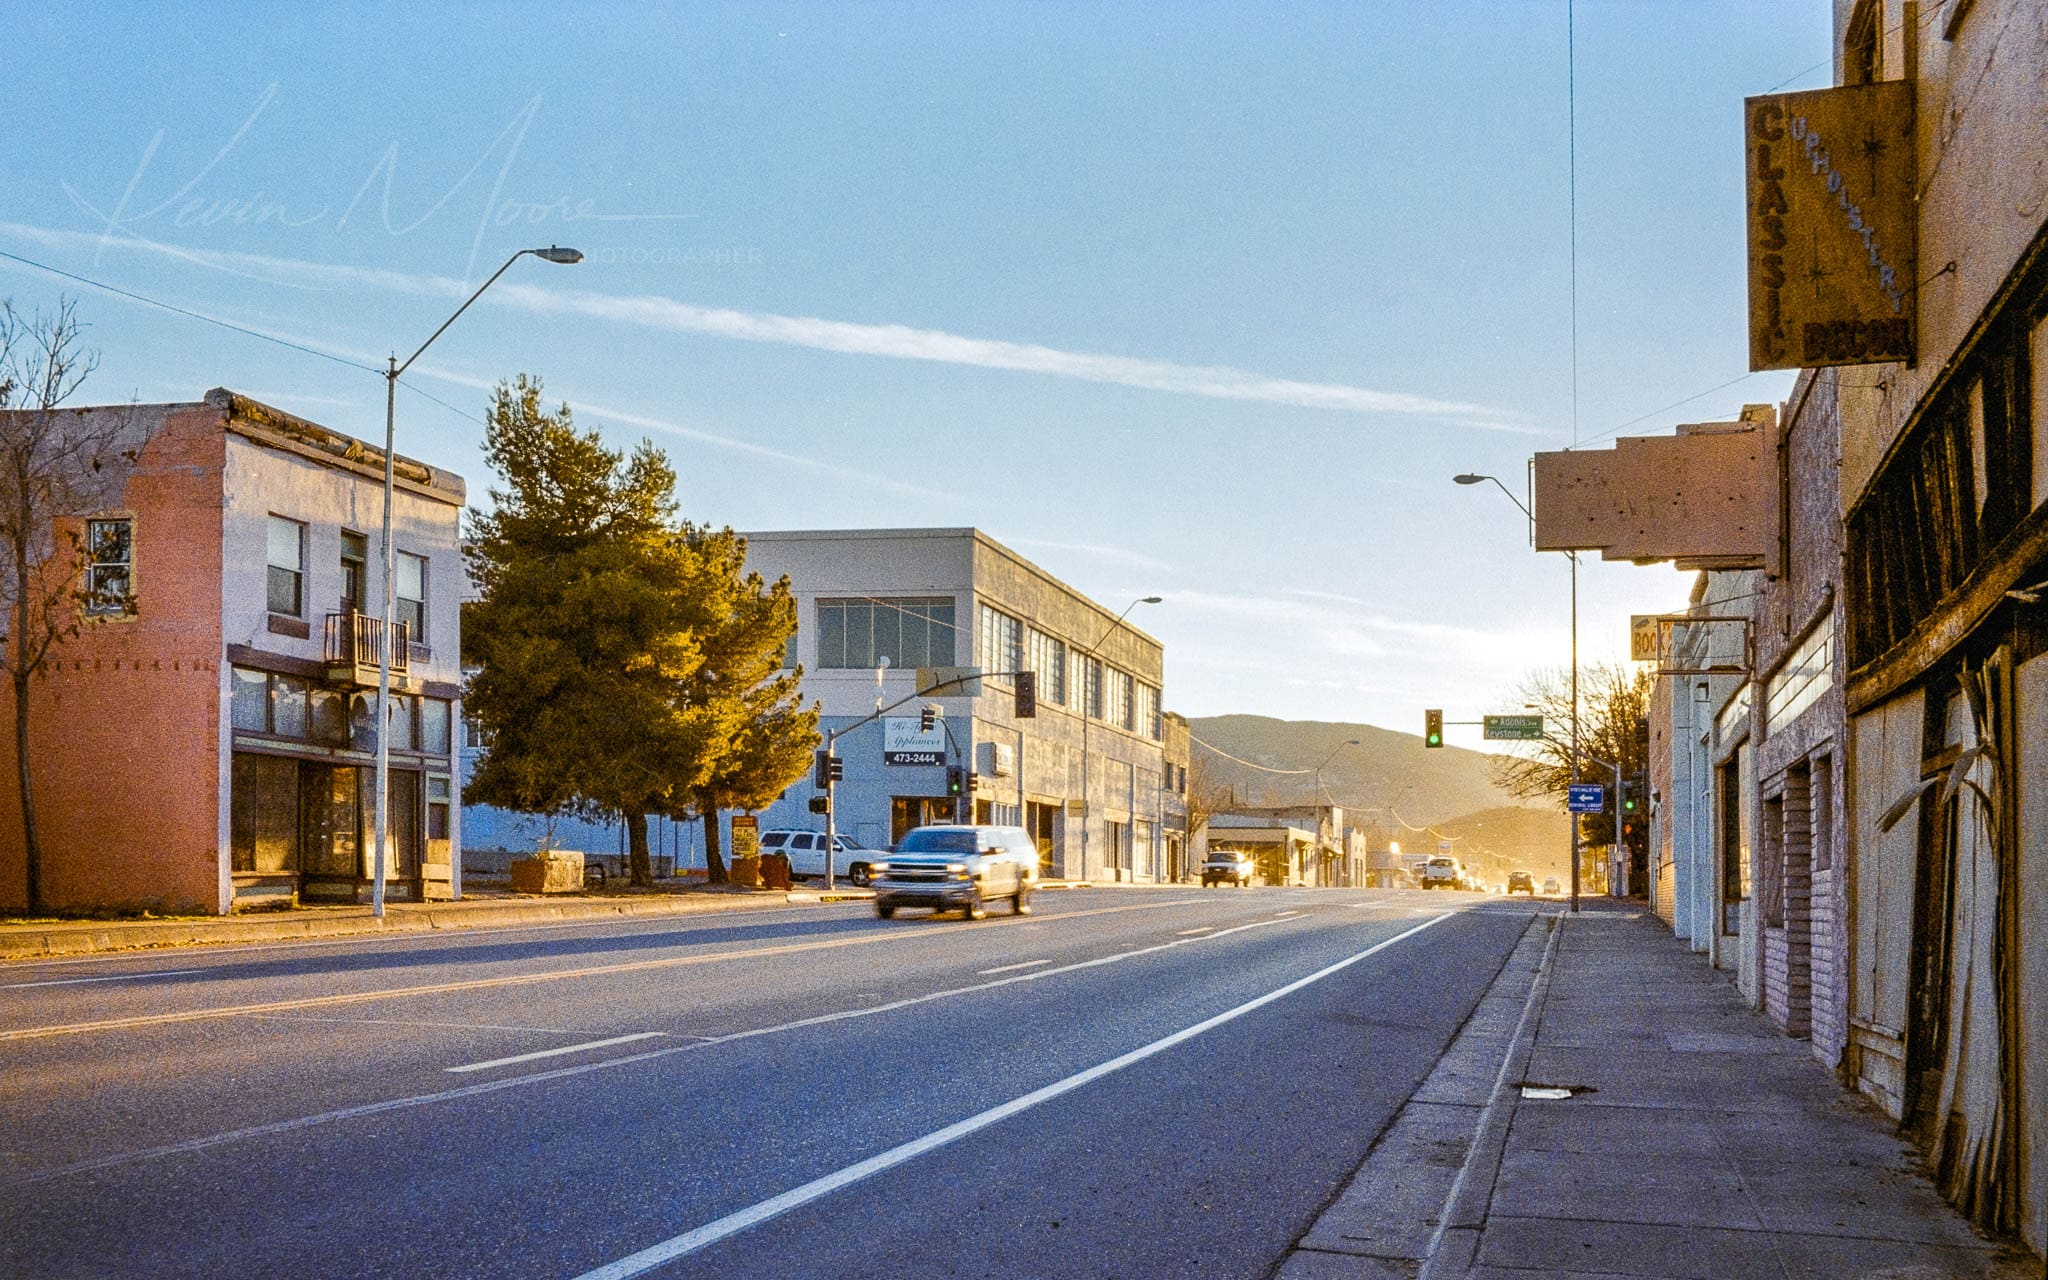 Peaceful small-town street at dawn with diverse architecture and minimal traffic.